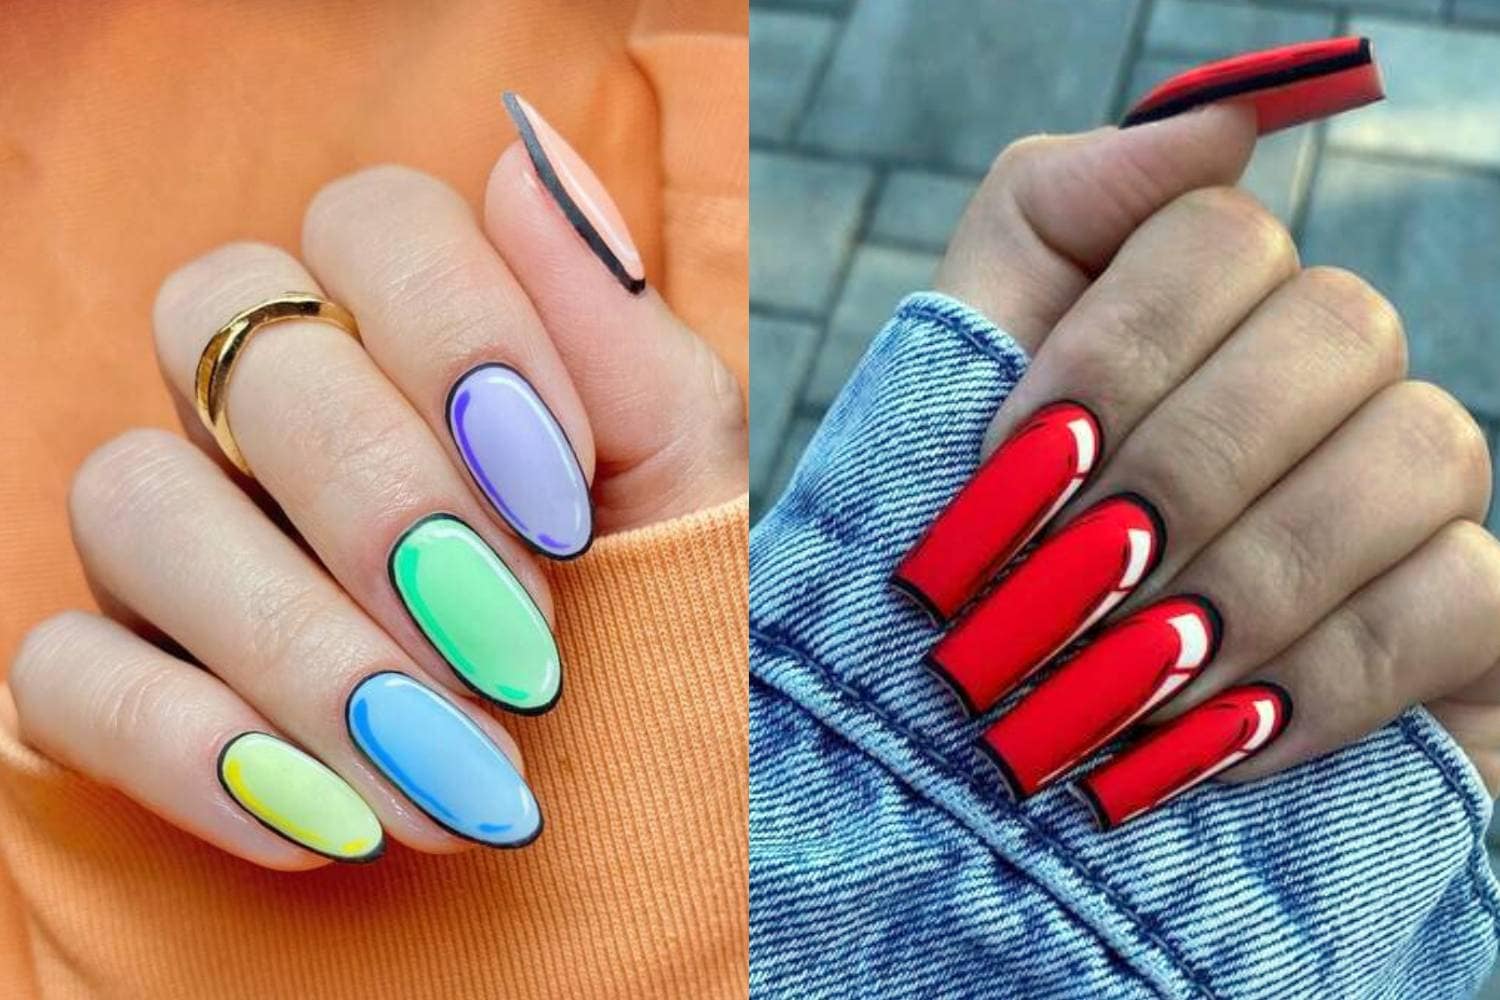 How To Do The Viral Pop Art Nails Trend, Plus 13 Ideas - Let's Eat Cake